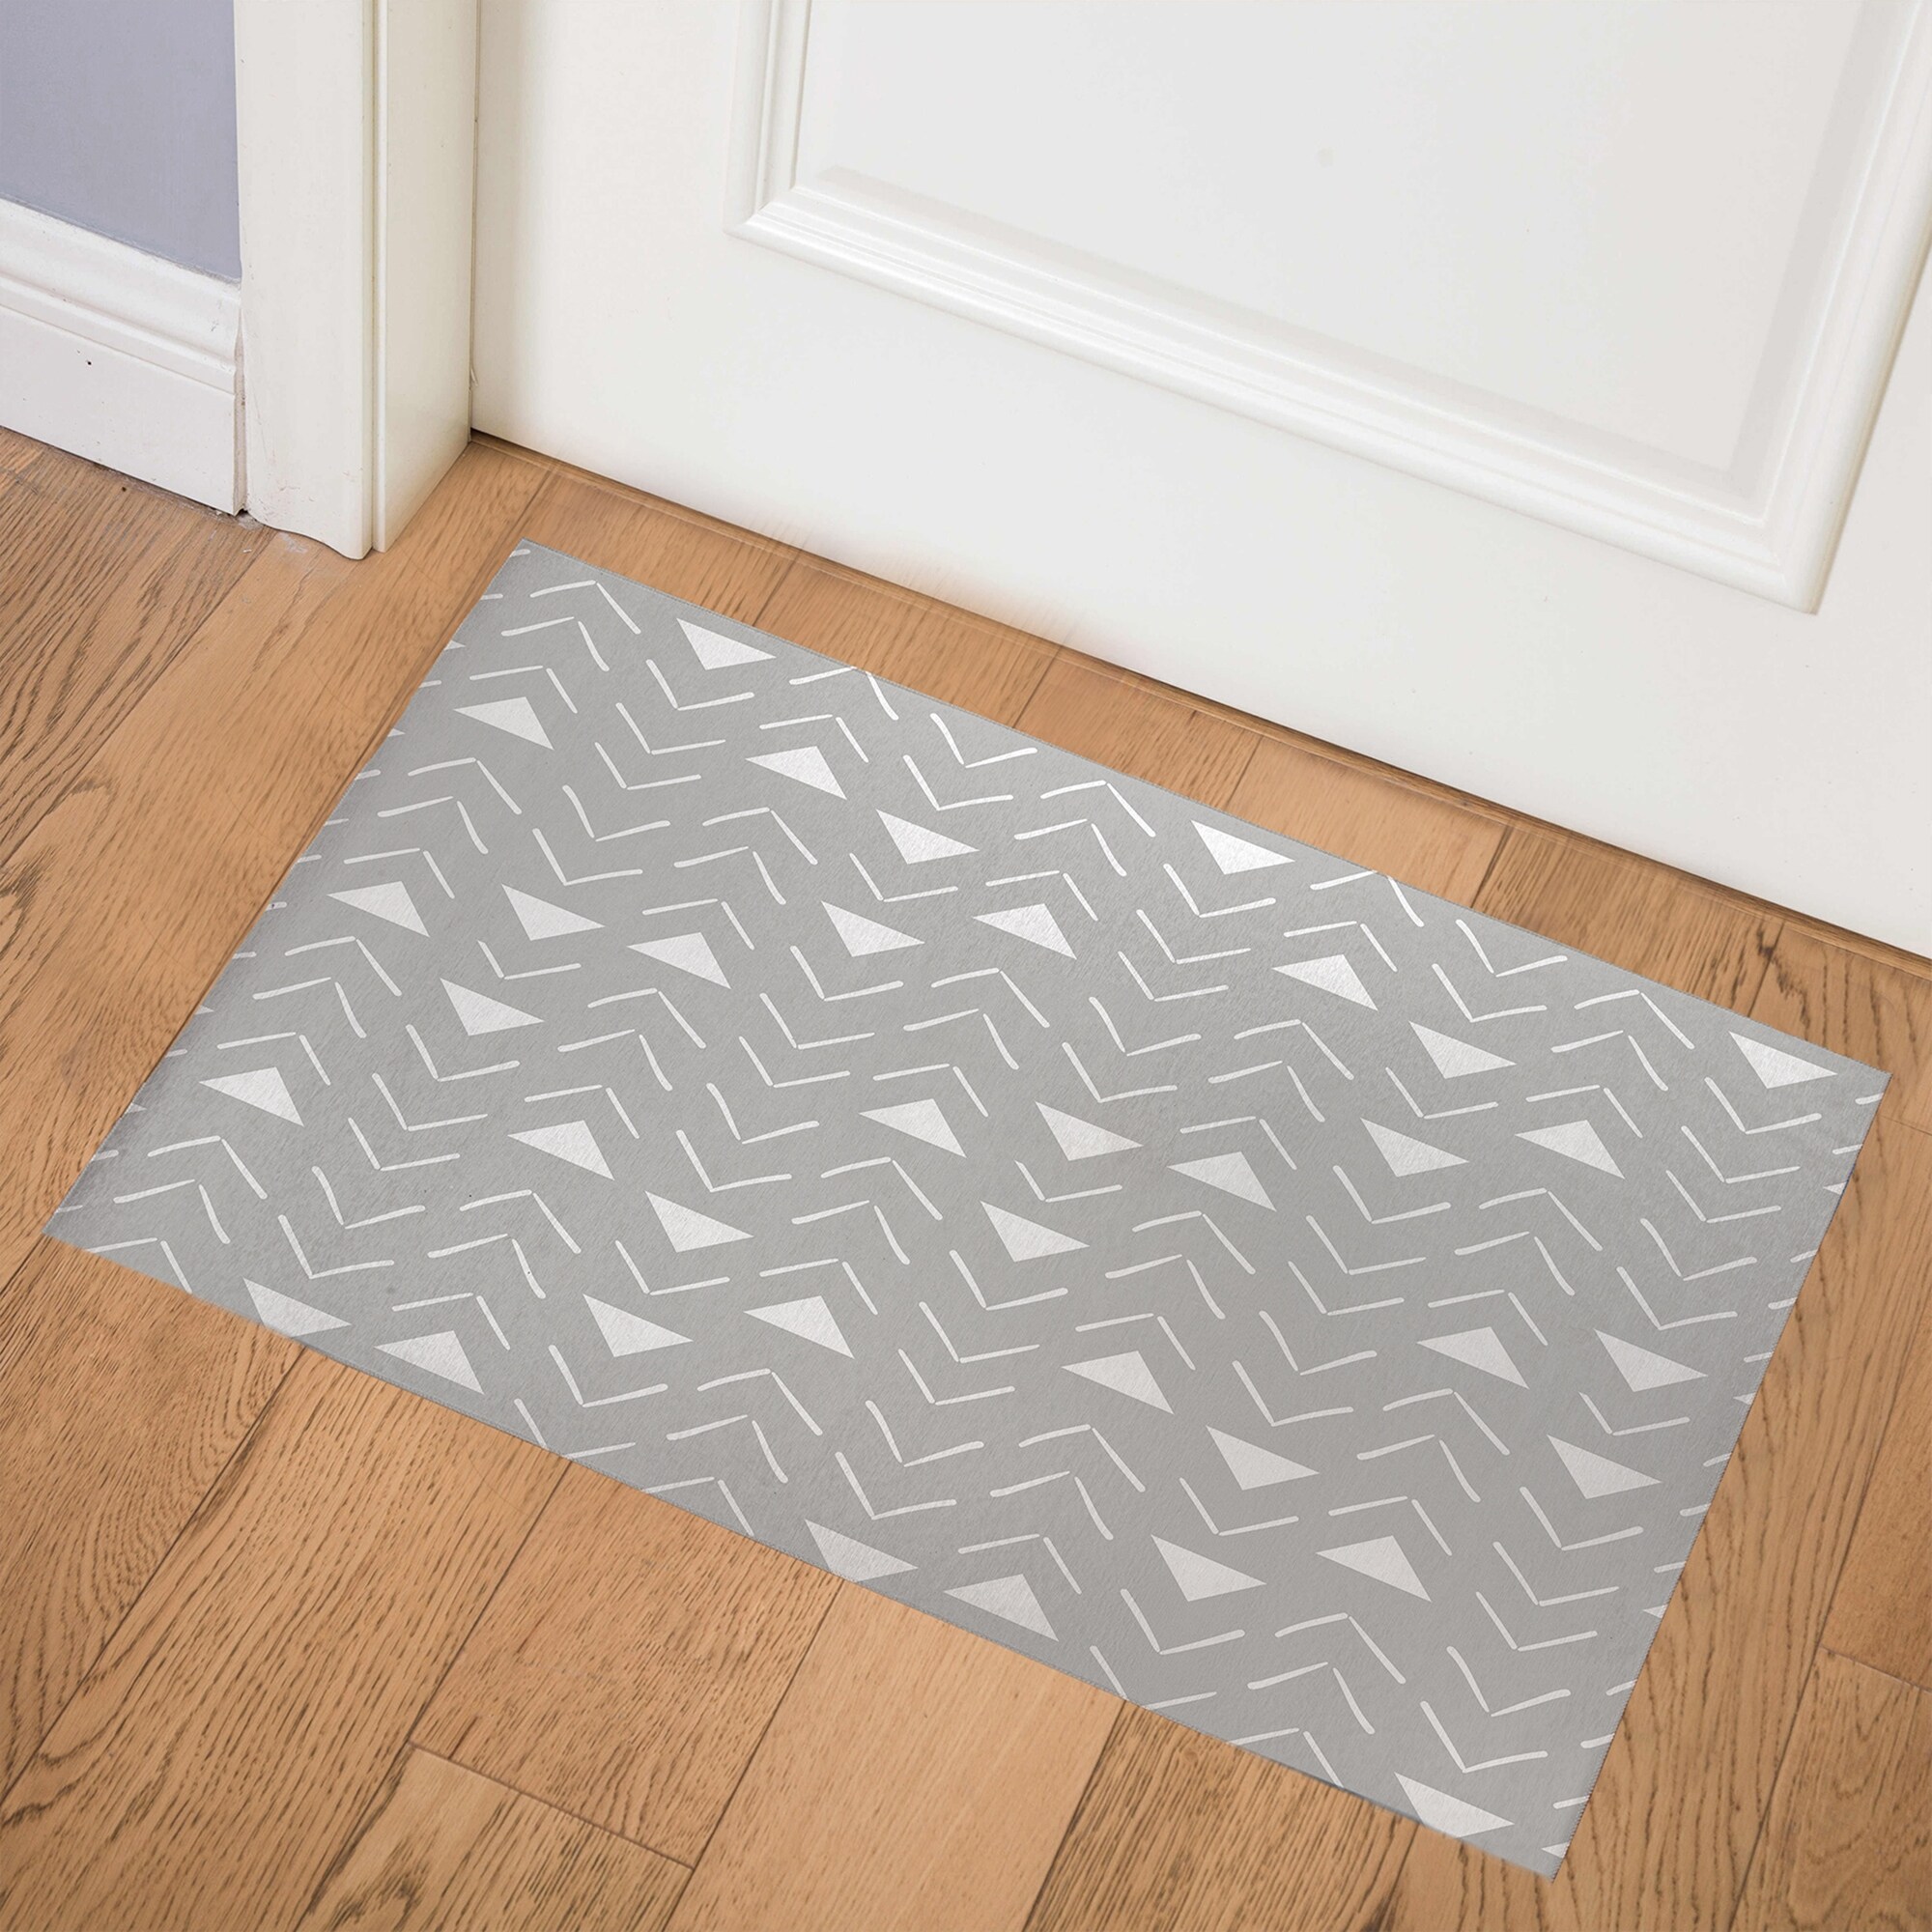 https://ak1.ostkcdn.com/images/products/is/images/direct/af268b4212dabb60fac93050d60e277ac5f82704/MUD-CLOTH-GREY-Indoor-Floor-Mat-By-Kavka-Designs.jpg